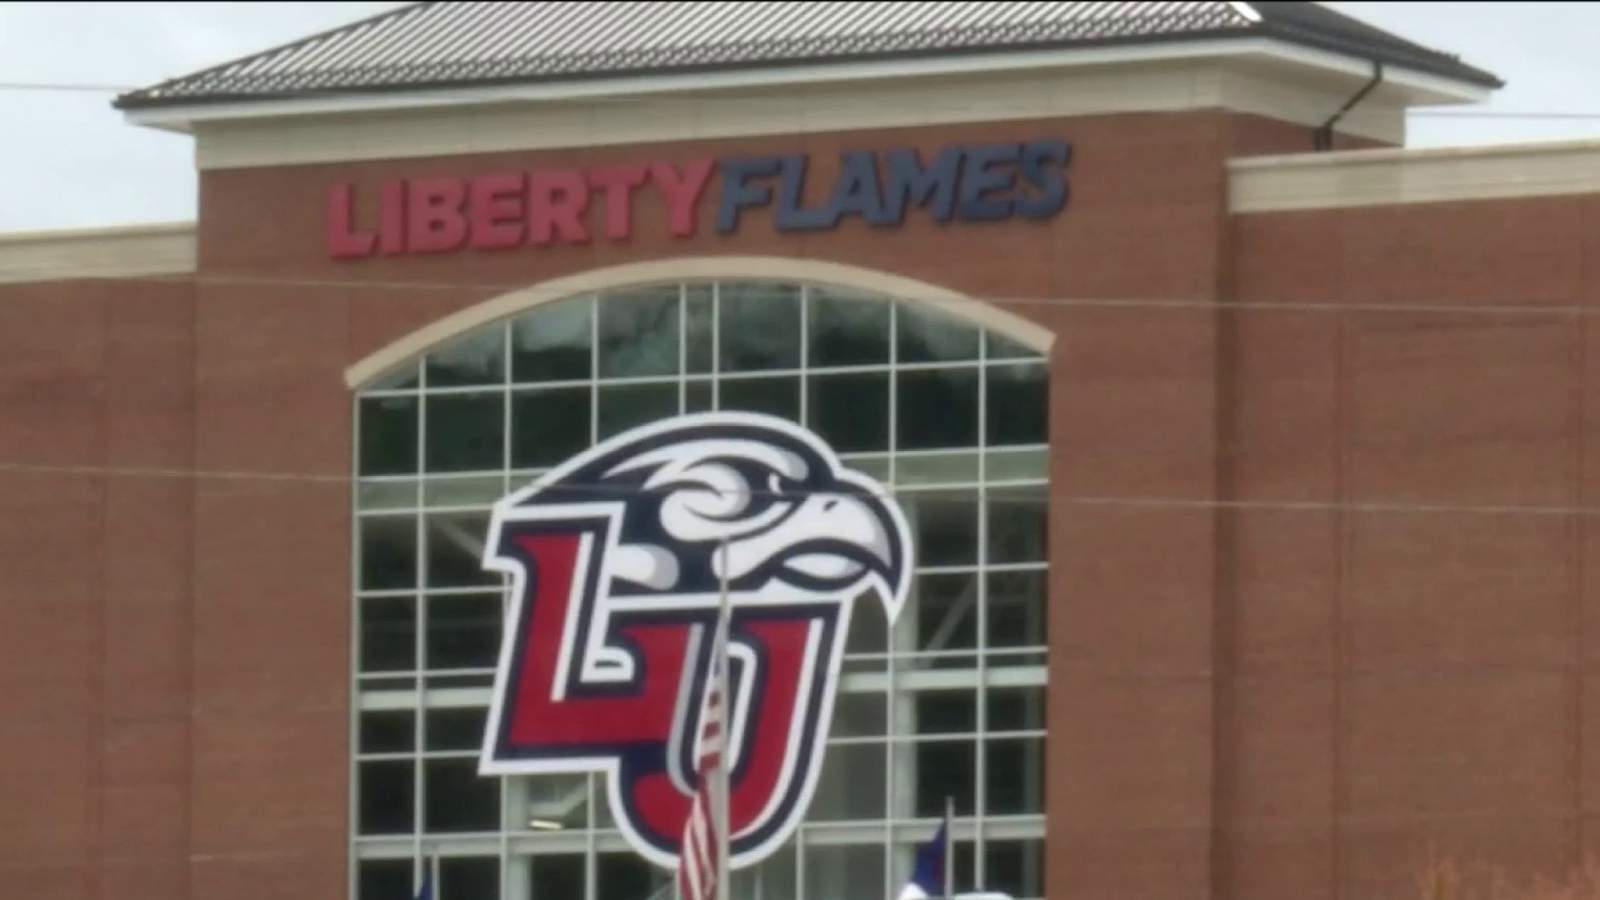 Liberty University answers FAQ about COVID-19, disputing NYT article about students showing symptoms